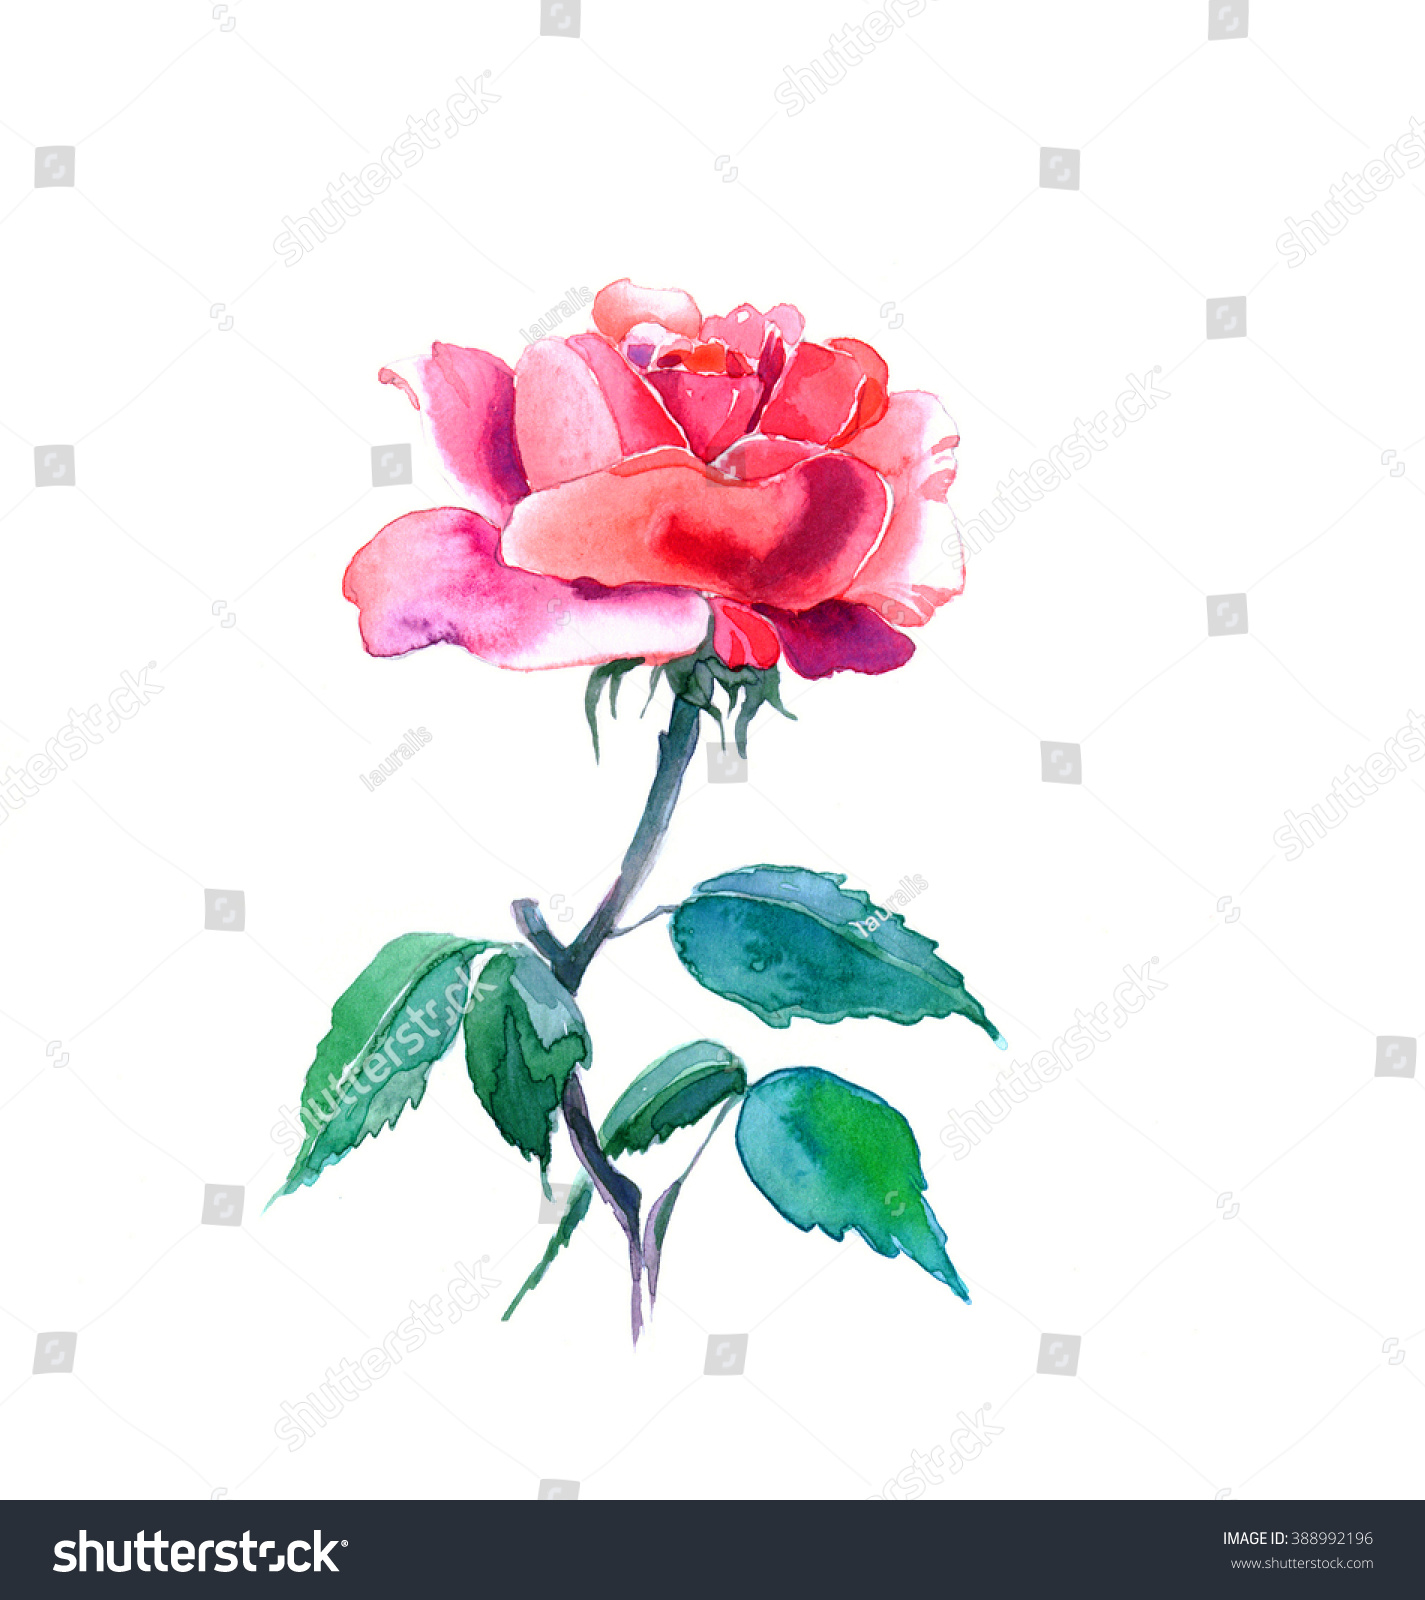 New View Rose Watercolor Hand Drawn Stock Illustration 388992196 ...